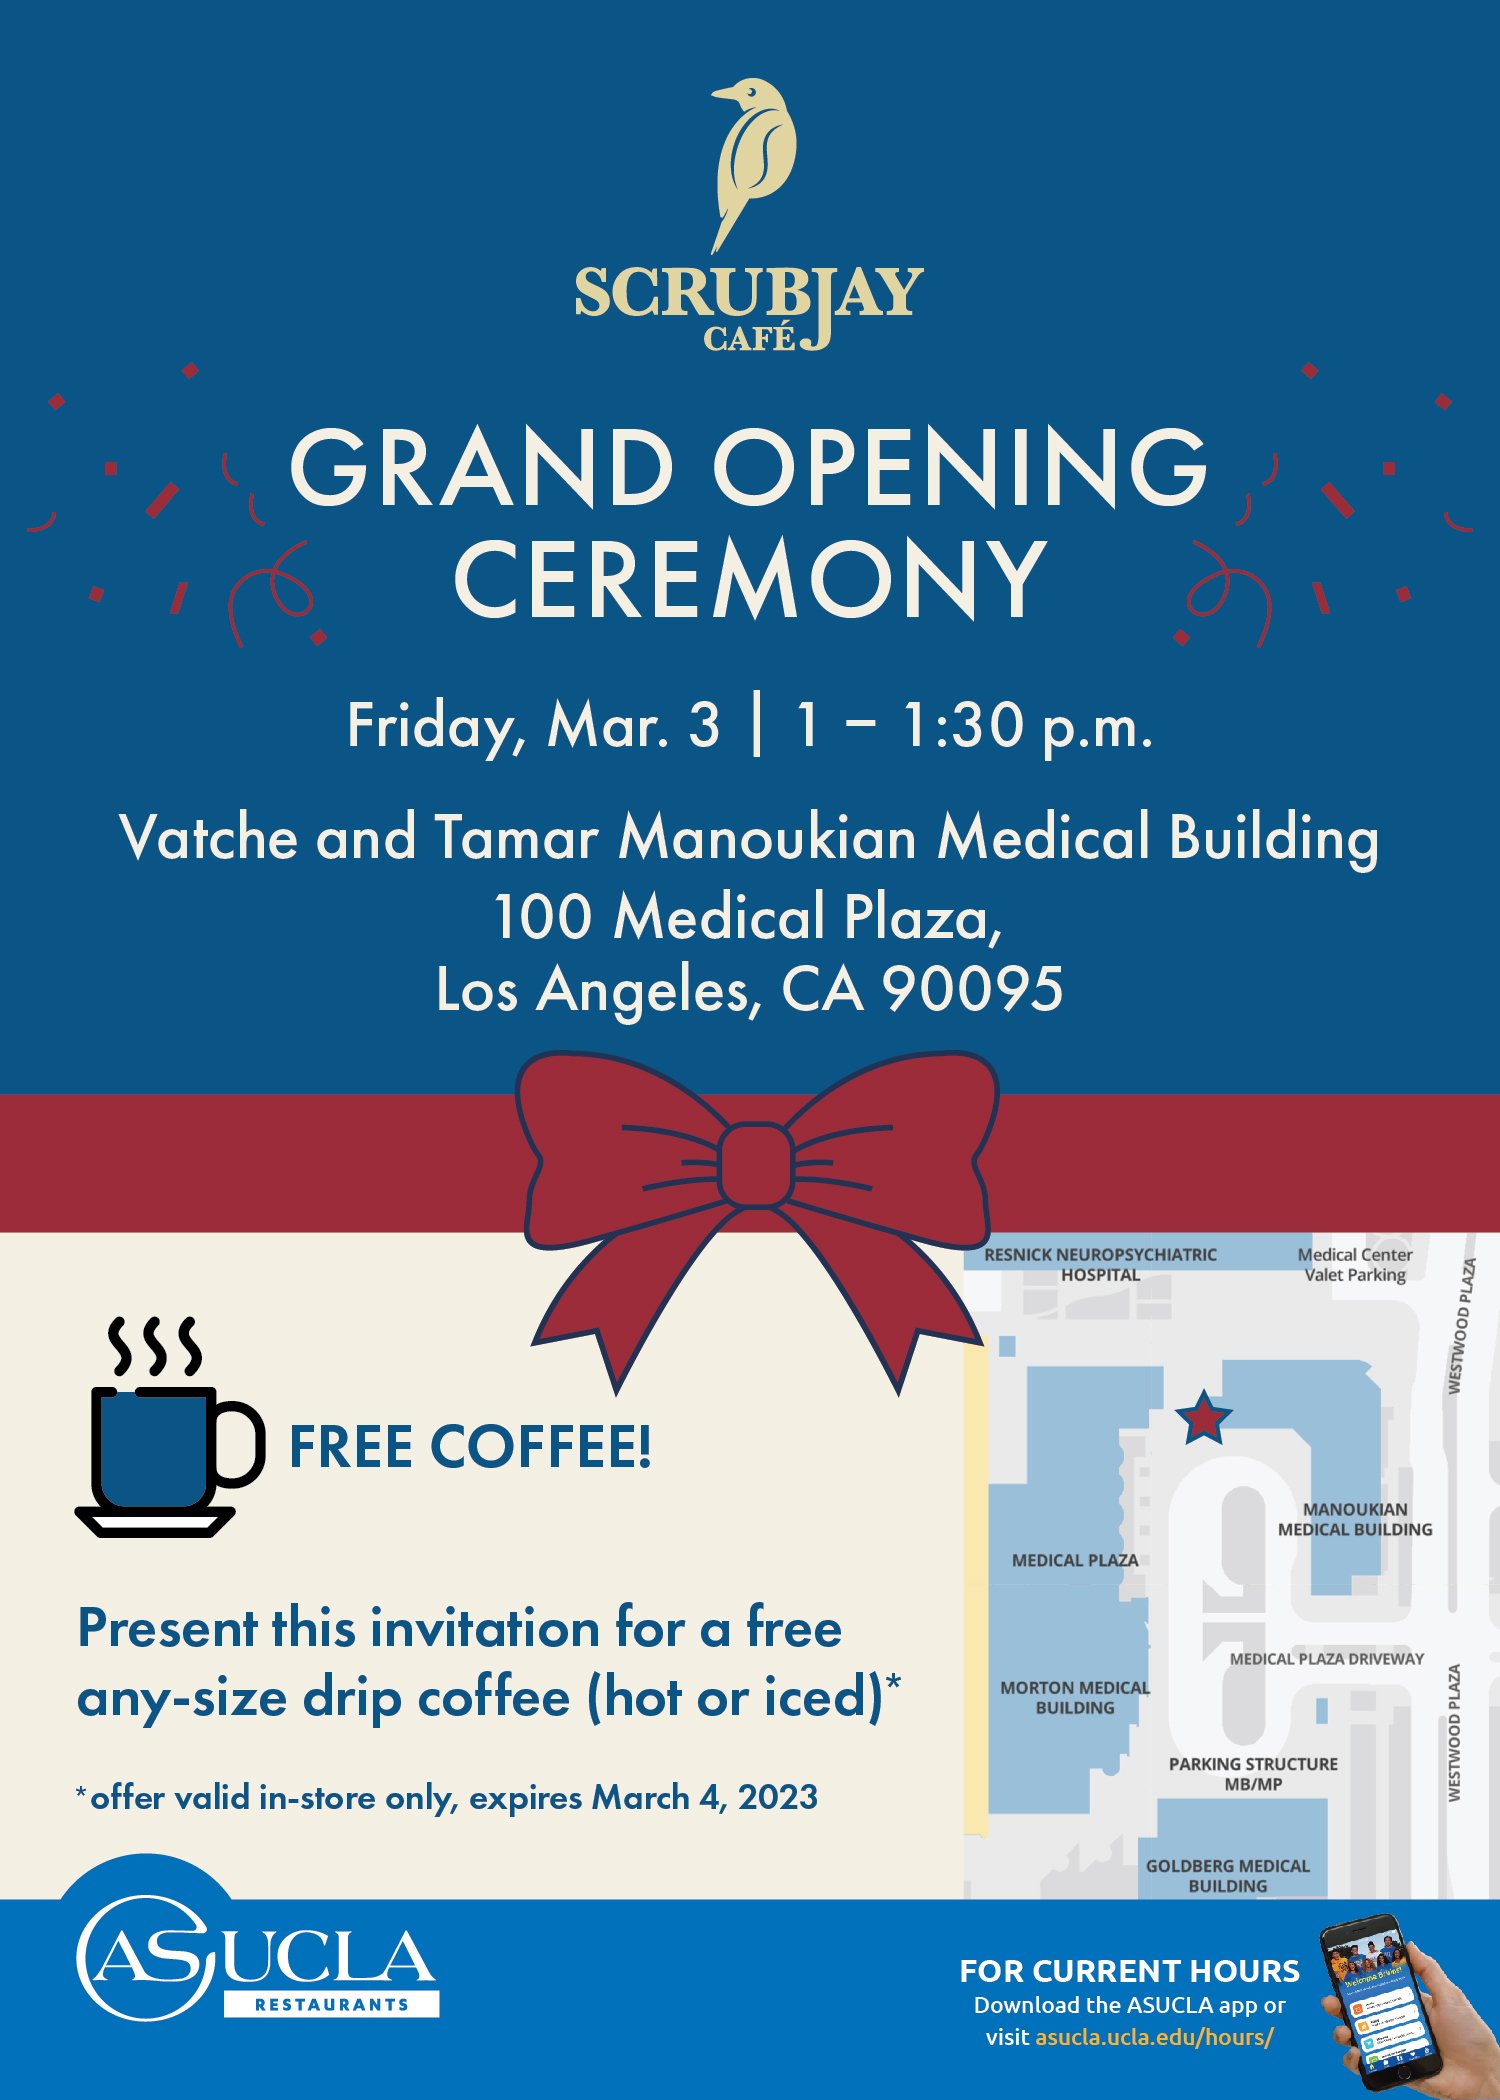 Grand opening: Ribbon cutting ceremony to commemorate ScrubJay